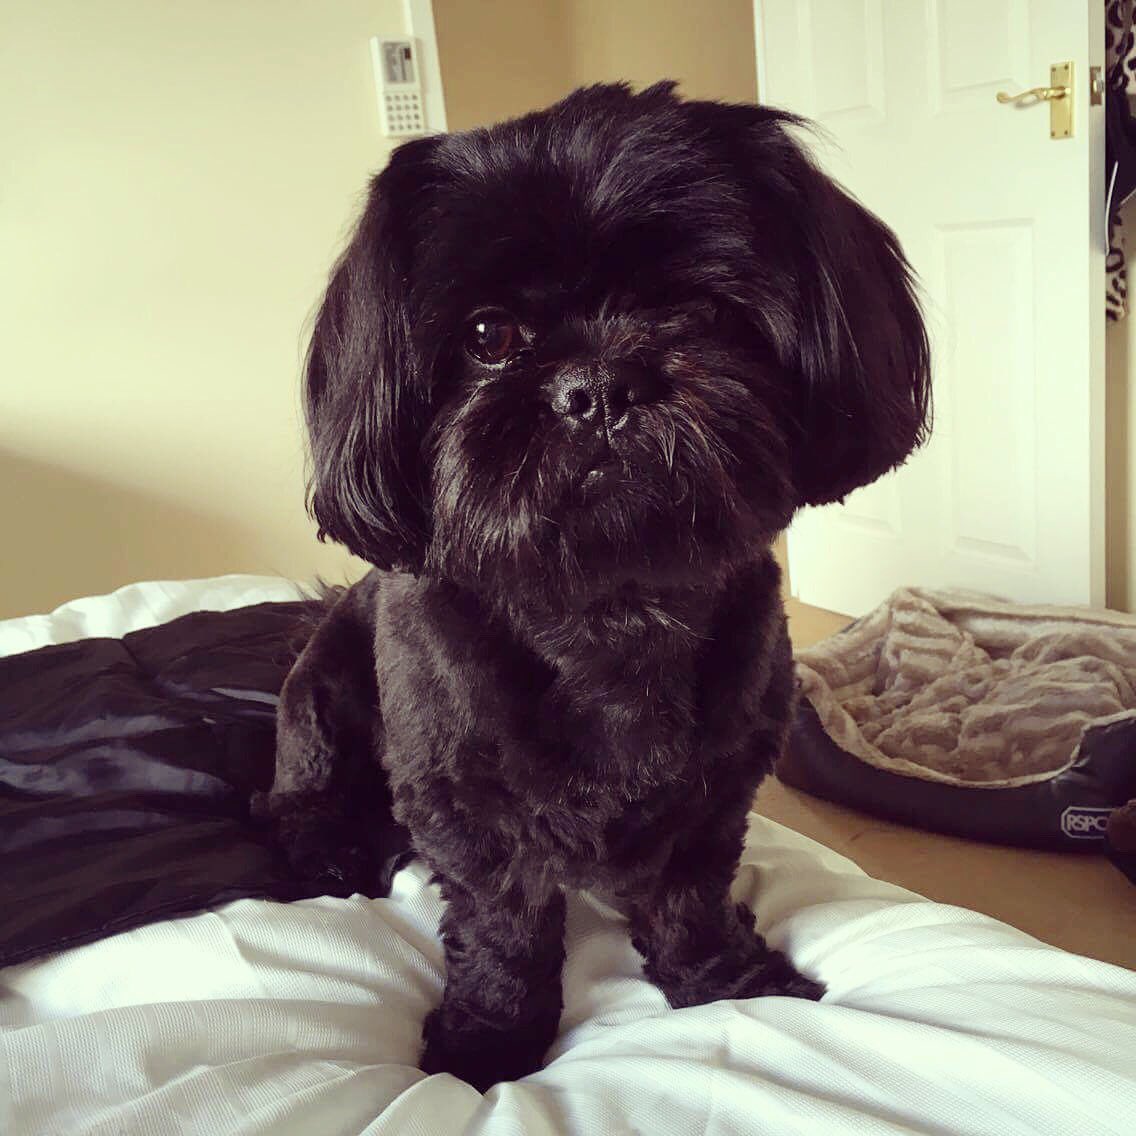 RT @RealMarieBlake: @chloekhanxxx @pupaid here's Vader rescued from a puppy farm, living in a shed! #wheresmum https://t.co/eSWLKvRpR6